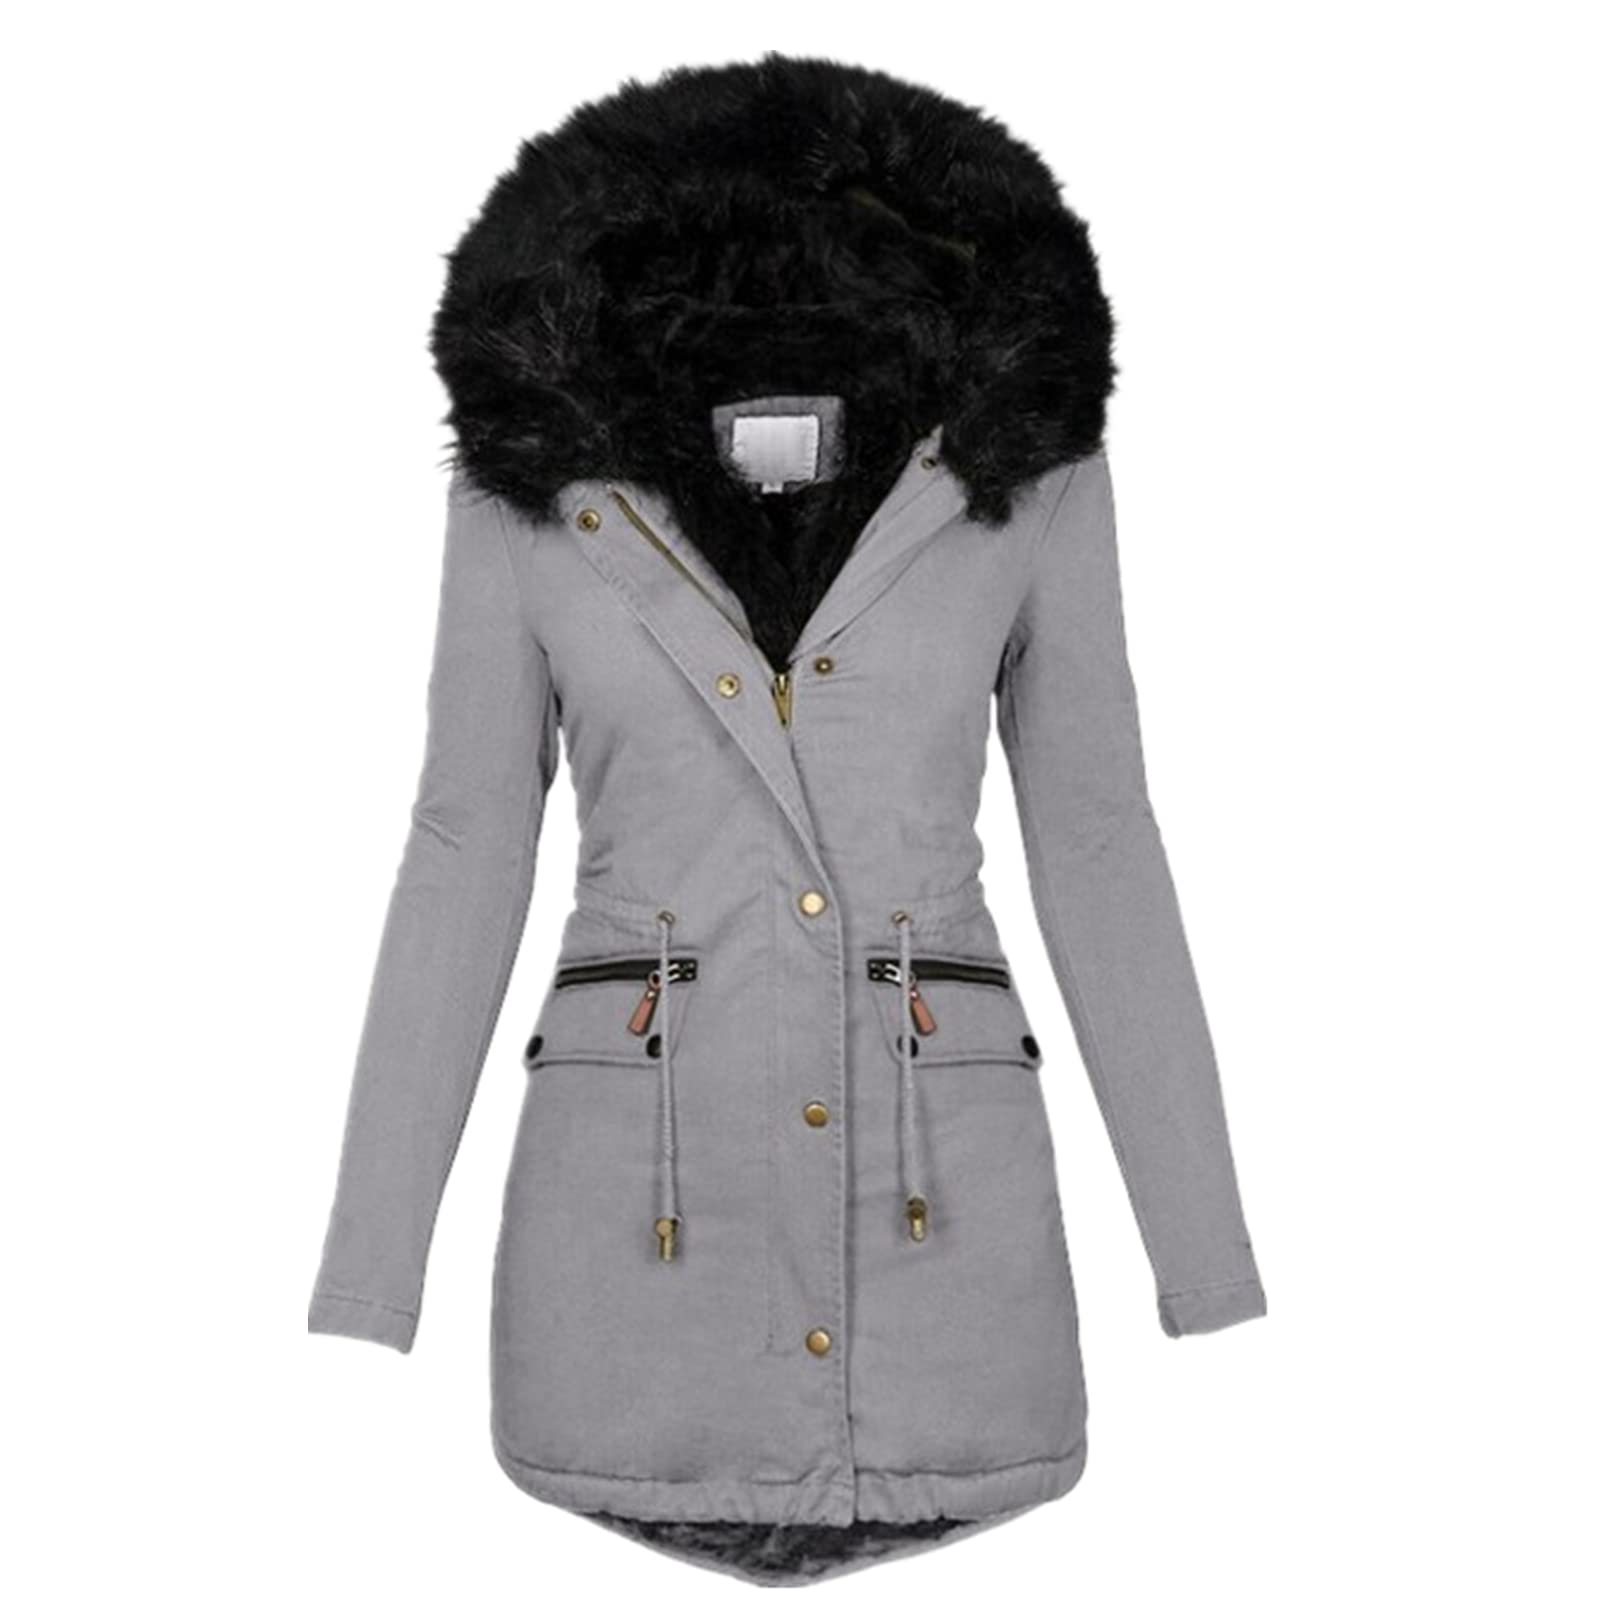 Figcoco New women's slim hooded mid-length warm zipper cotton coat